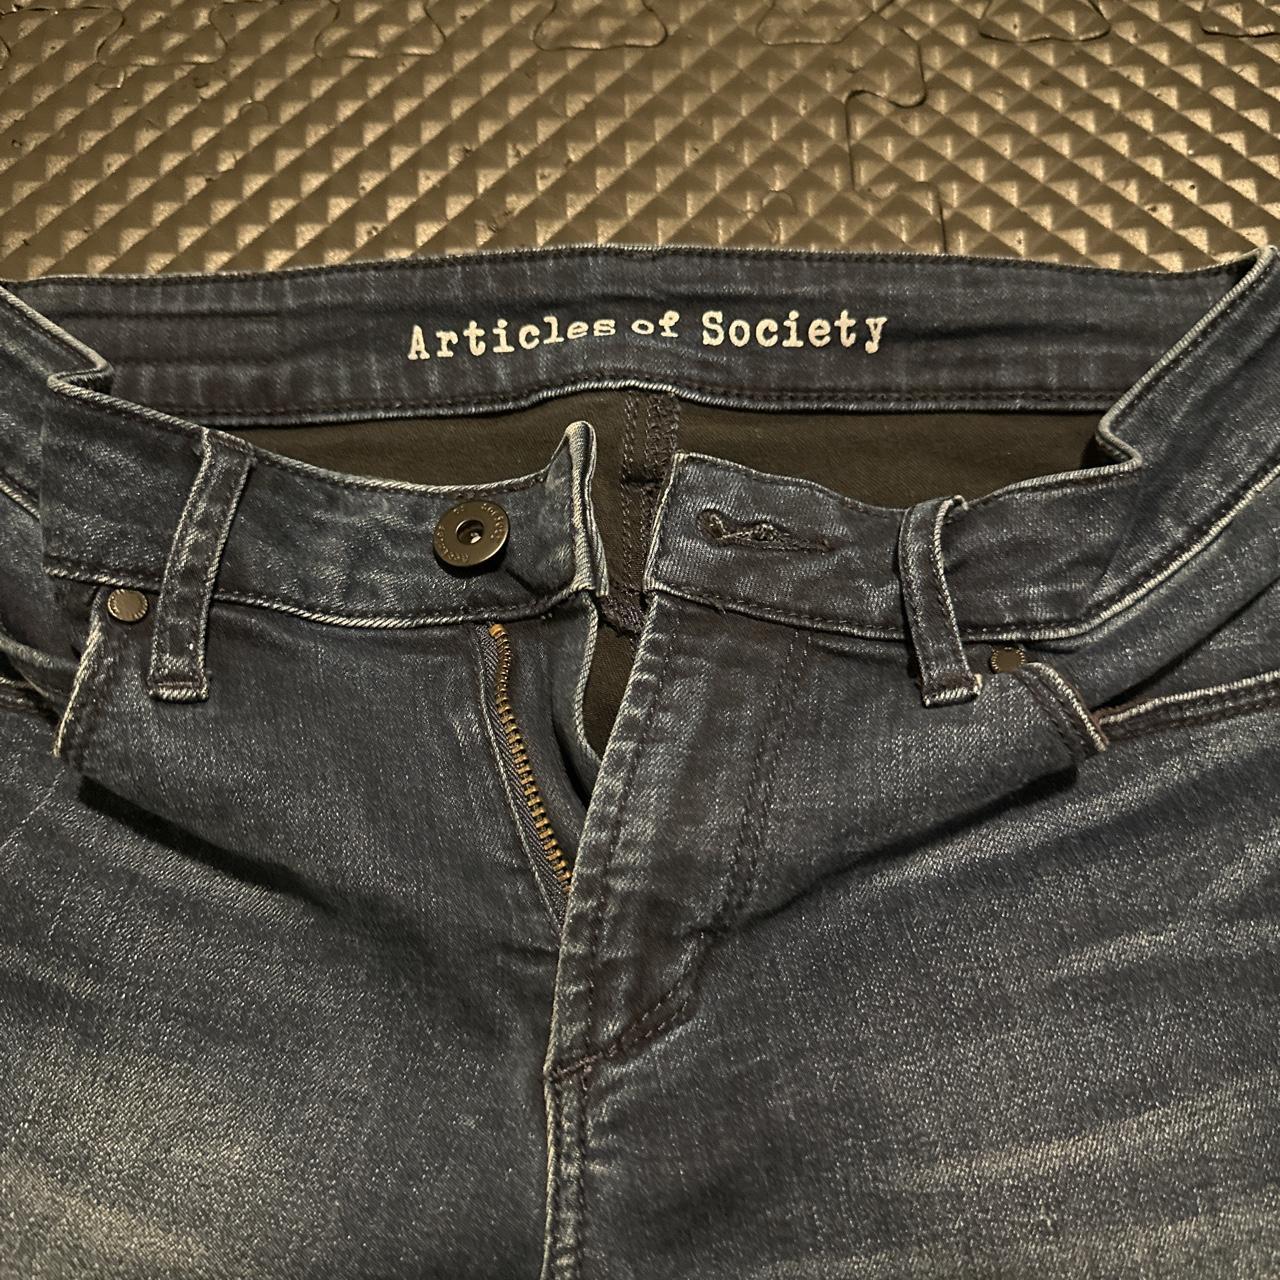 Articles of Society Women's Navy Jeans (3)